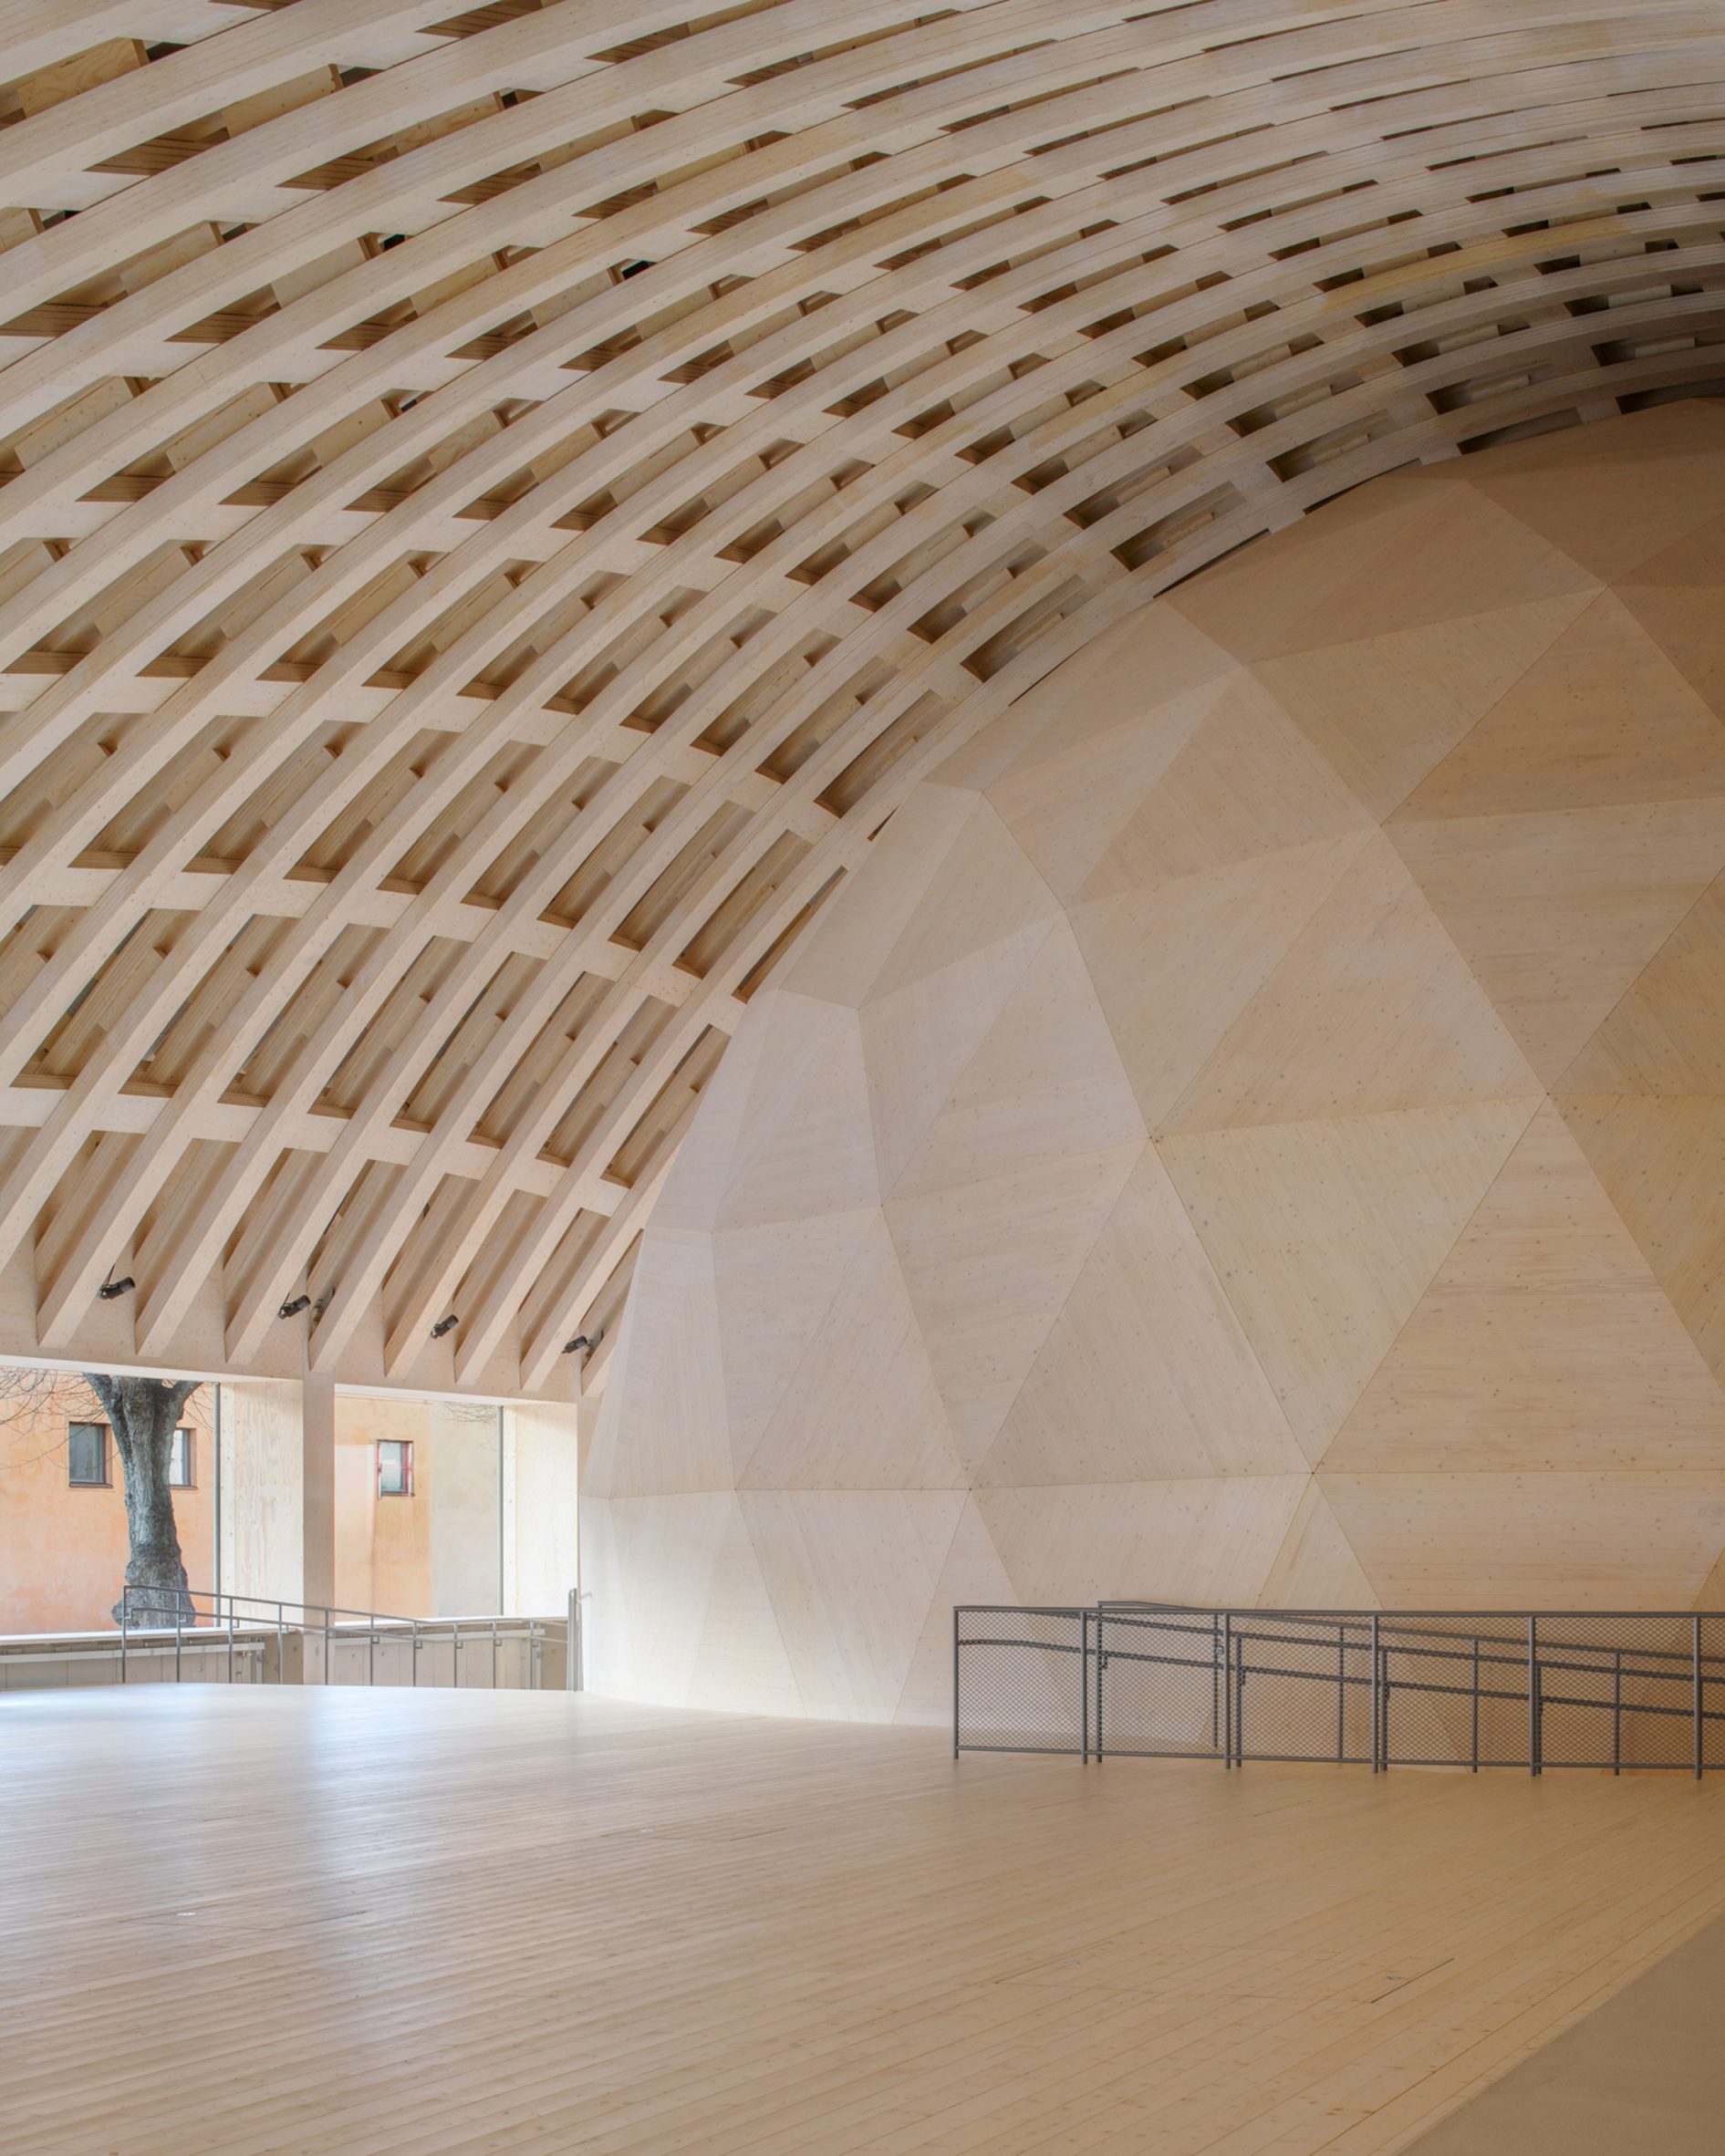 Timber sphere at Wisdome Stockholm by Elding Oscarson